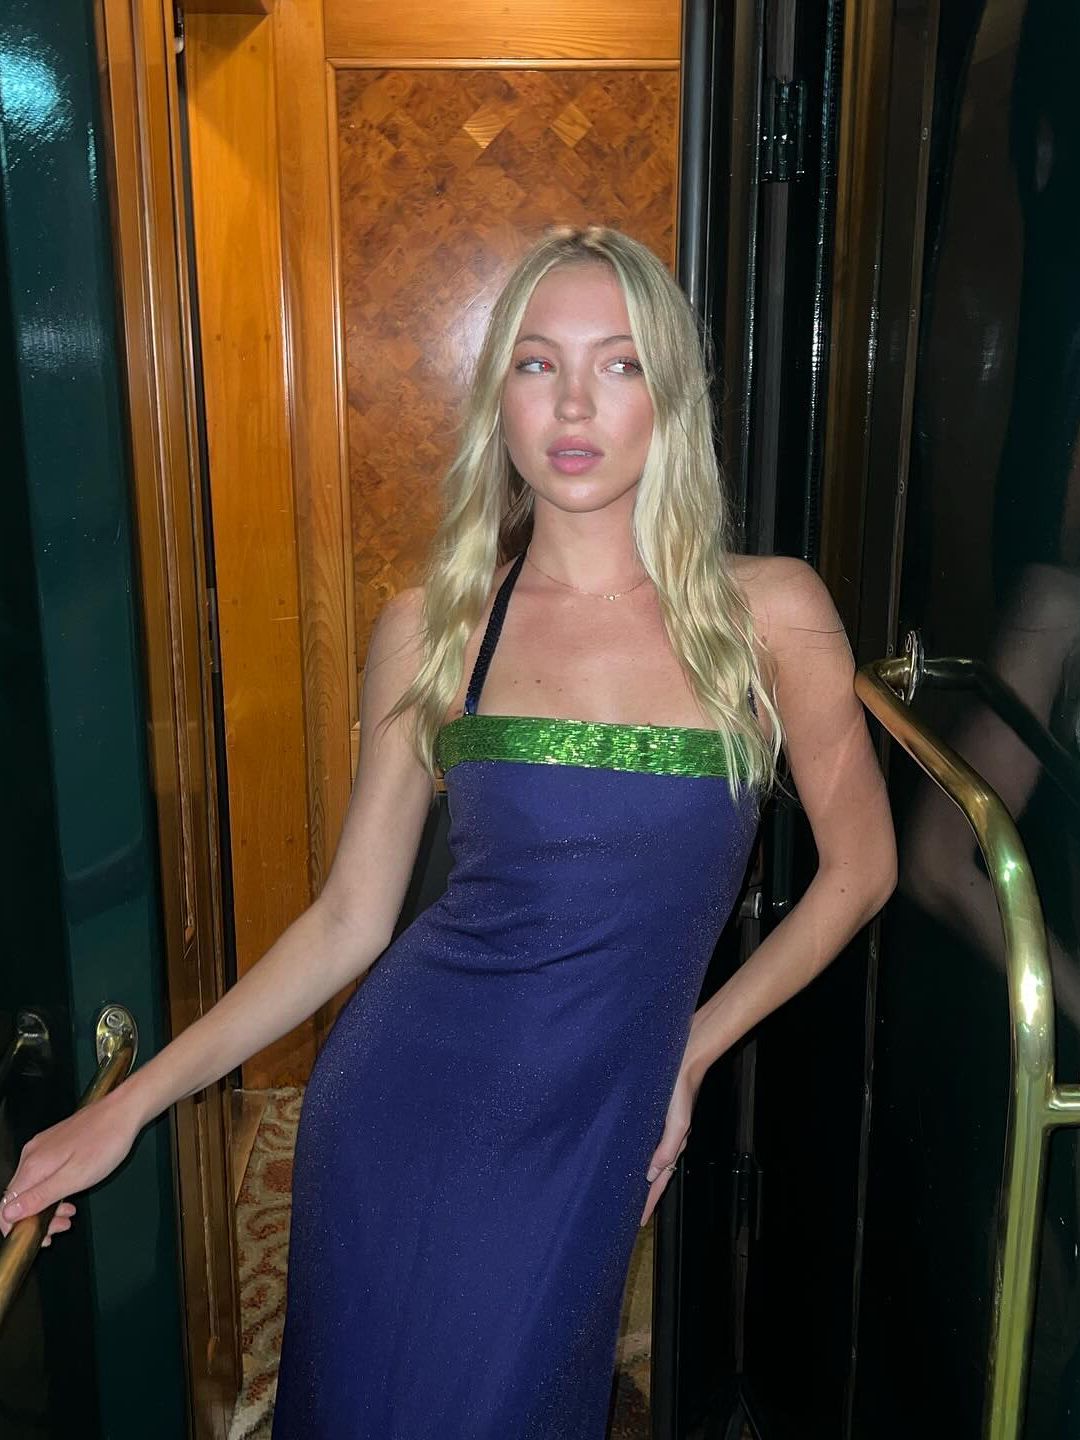 Lila Moss poses in a blue dress with green sequin trim while on holiday 